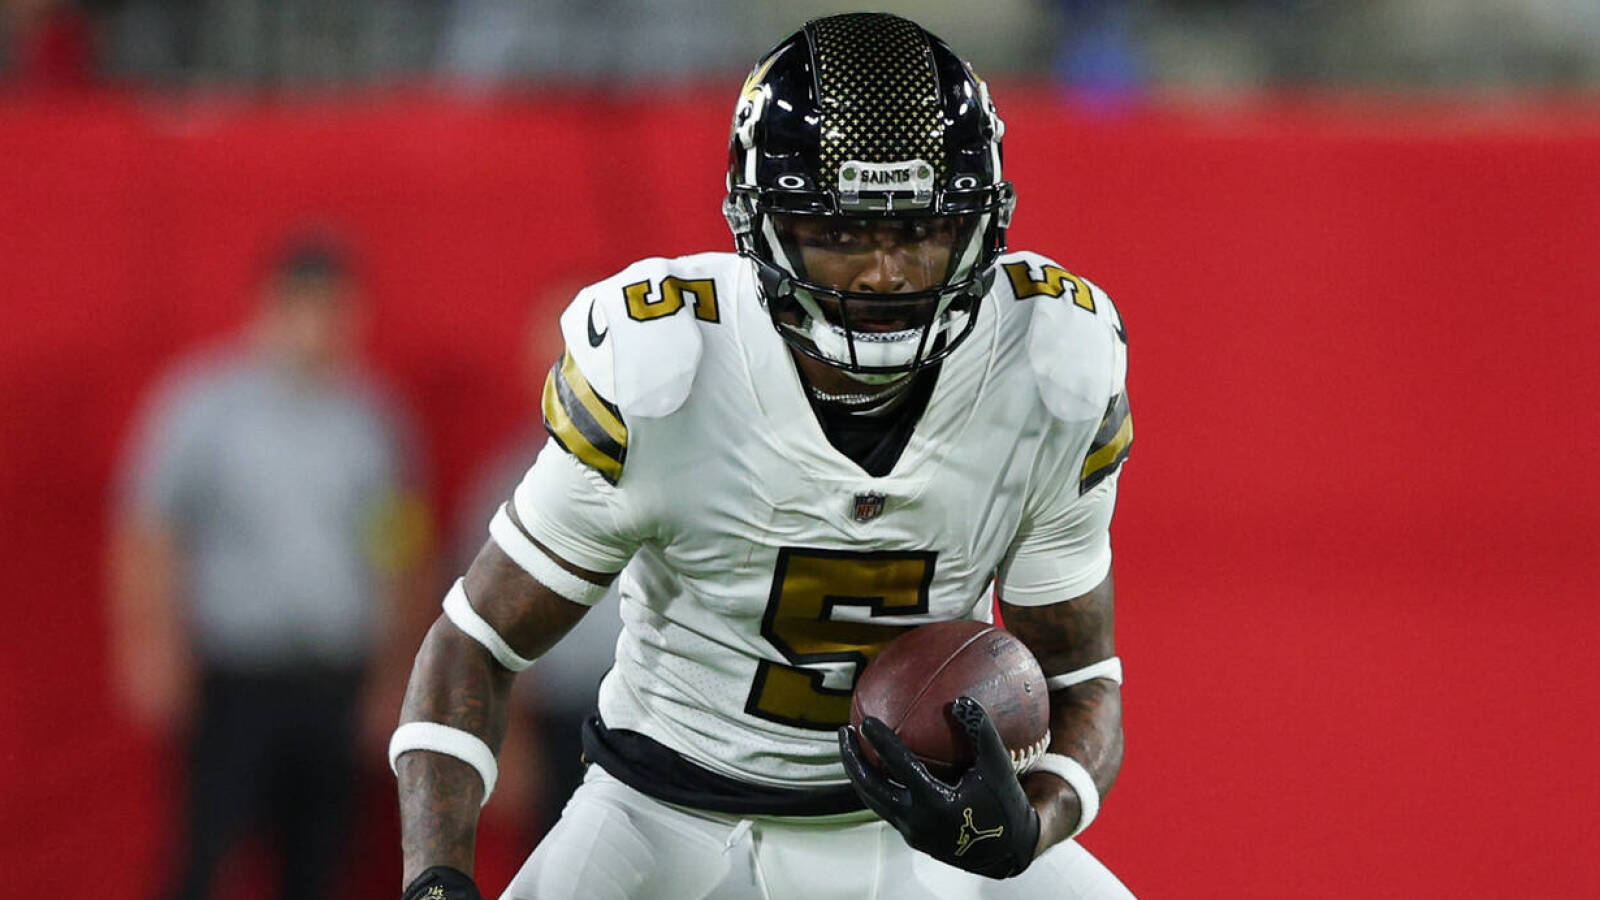 Five-time Pro Bowl WR expected to make NFL comeback with Jaguars